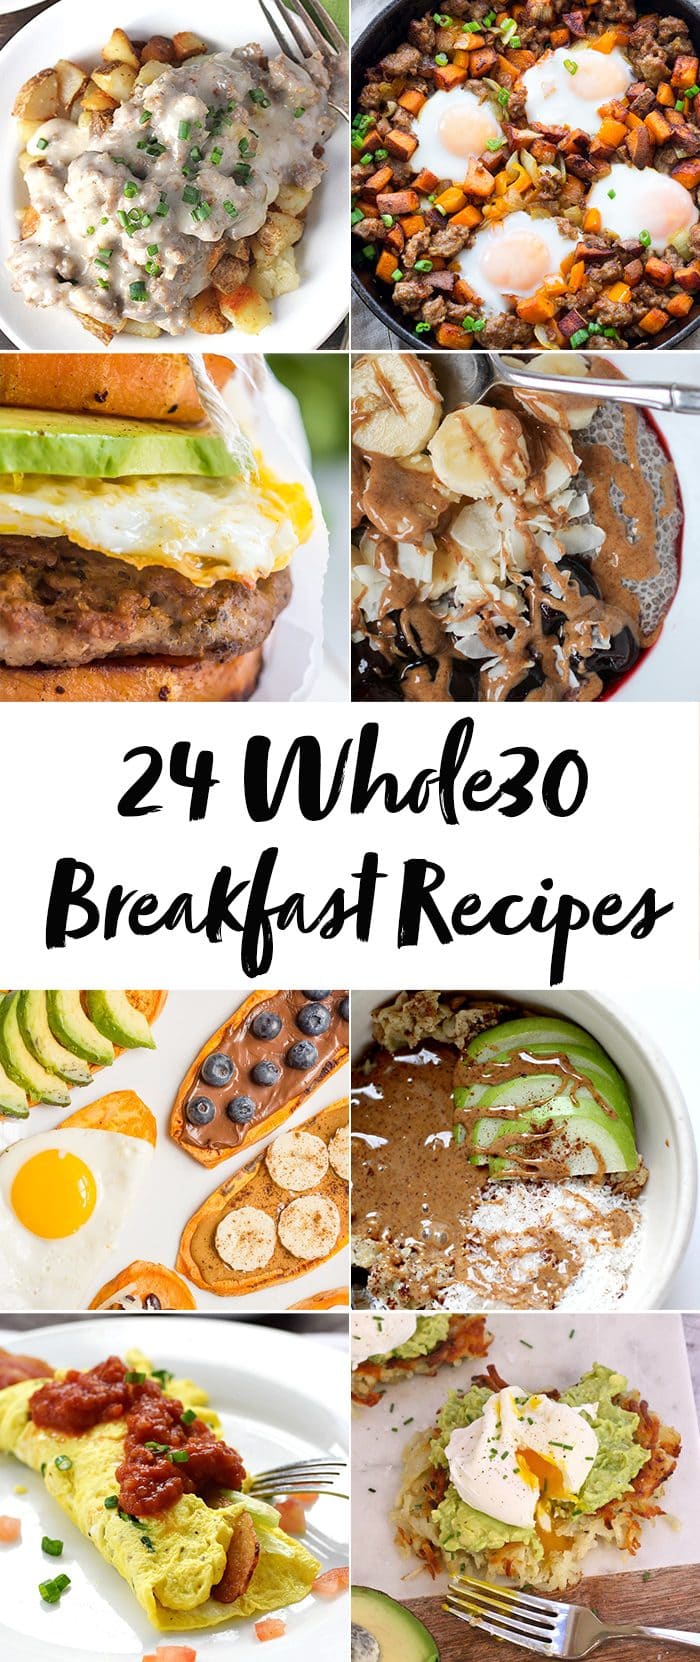 These Whole30 breakfast recipes will have you antsy to start a round! With both savory and sweet Whole30 breakfast recipes, there's definitely something for everyone here. Try some of my favorite Whole30 breakfast recipes and let me know which is your favorite! 